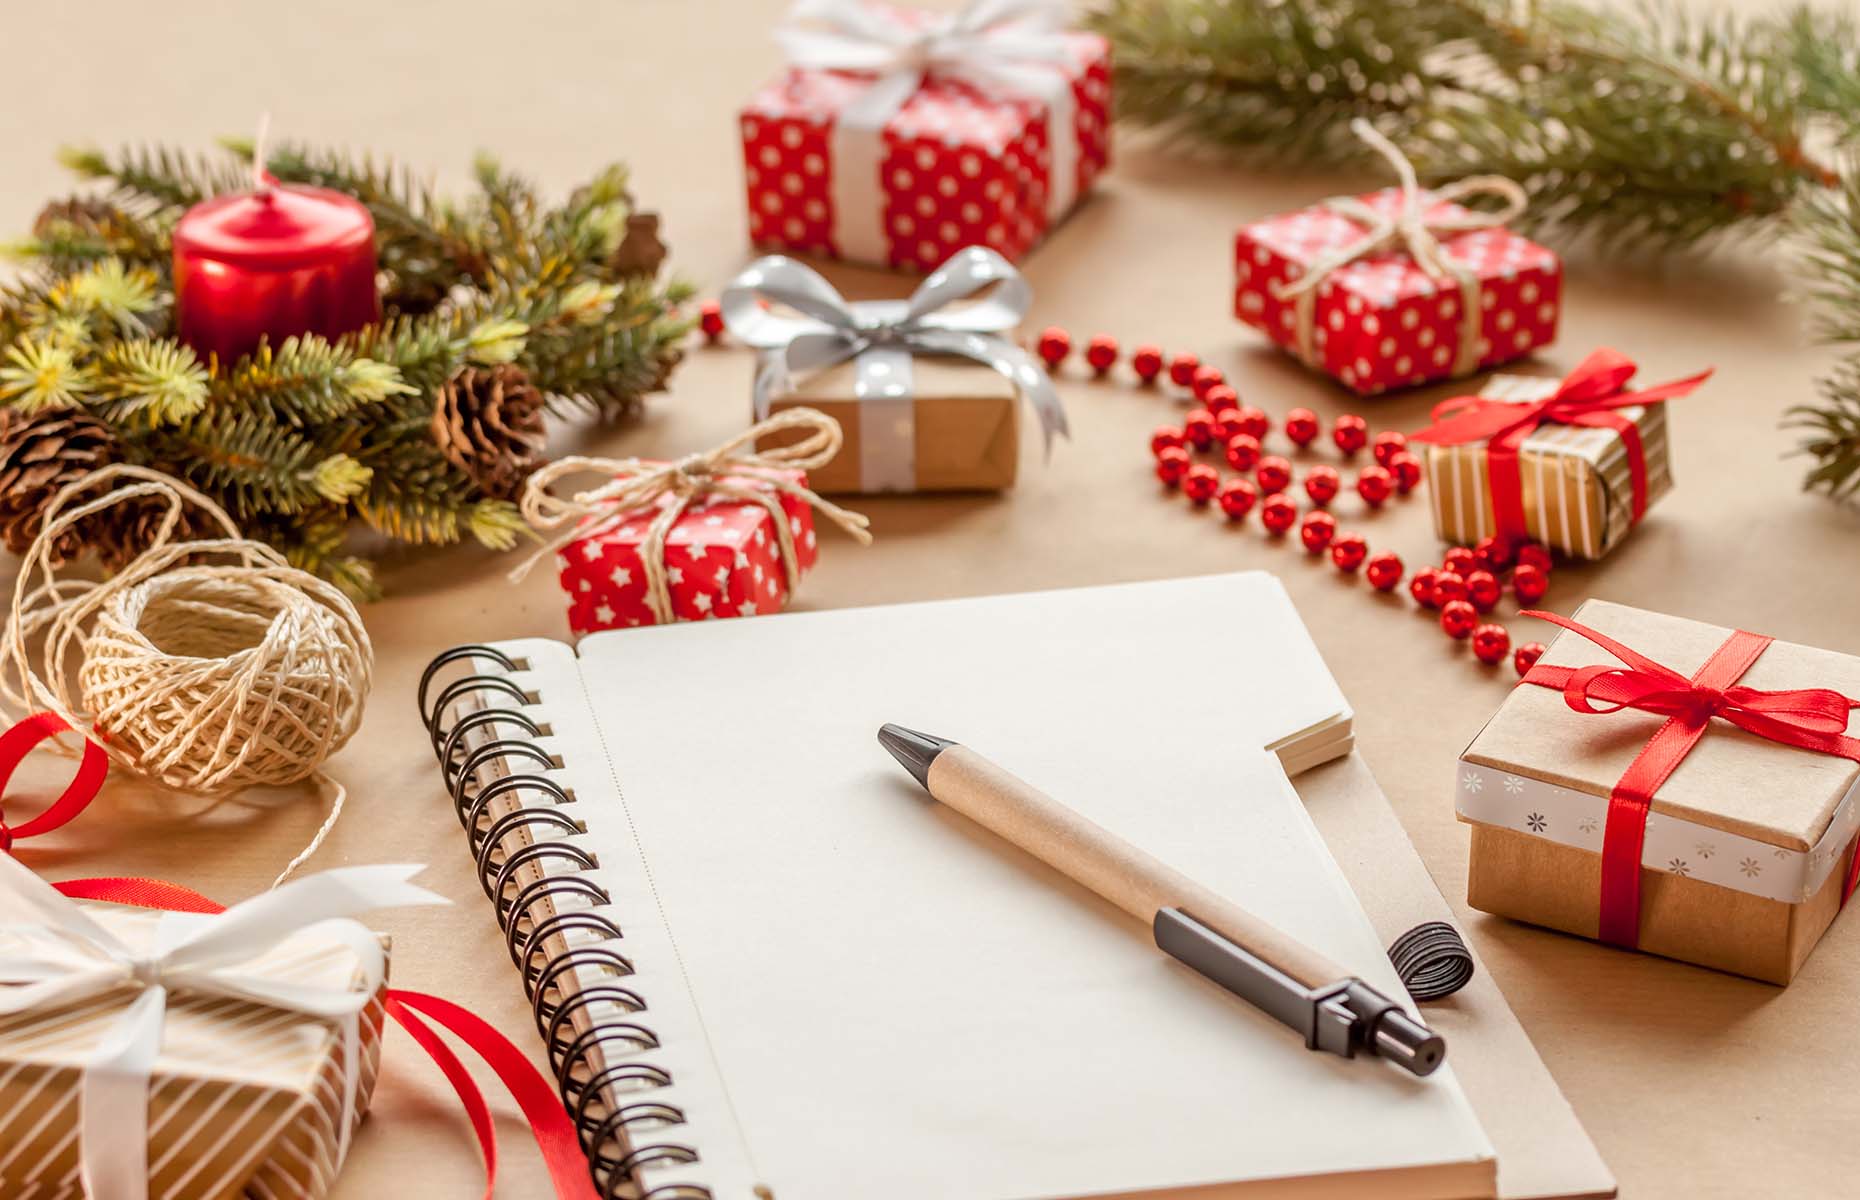 Planning a Christmas to-do list (Image: Chechotkin/Shutterstock)